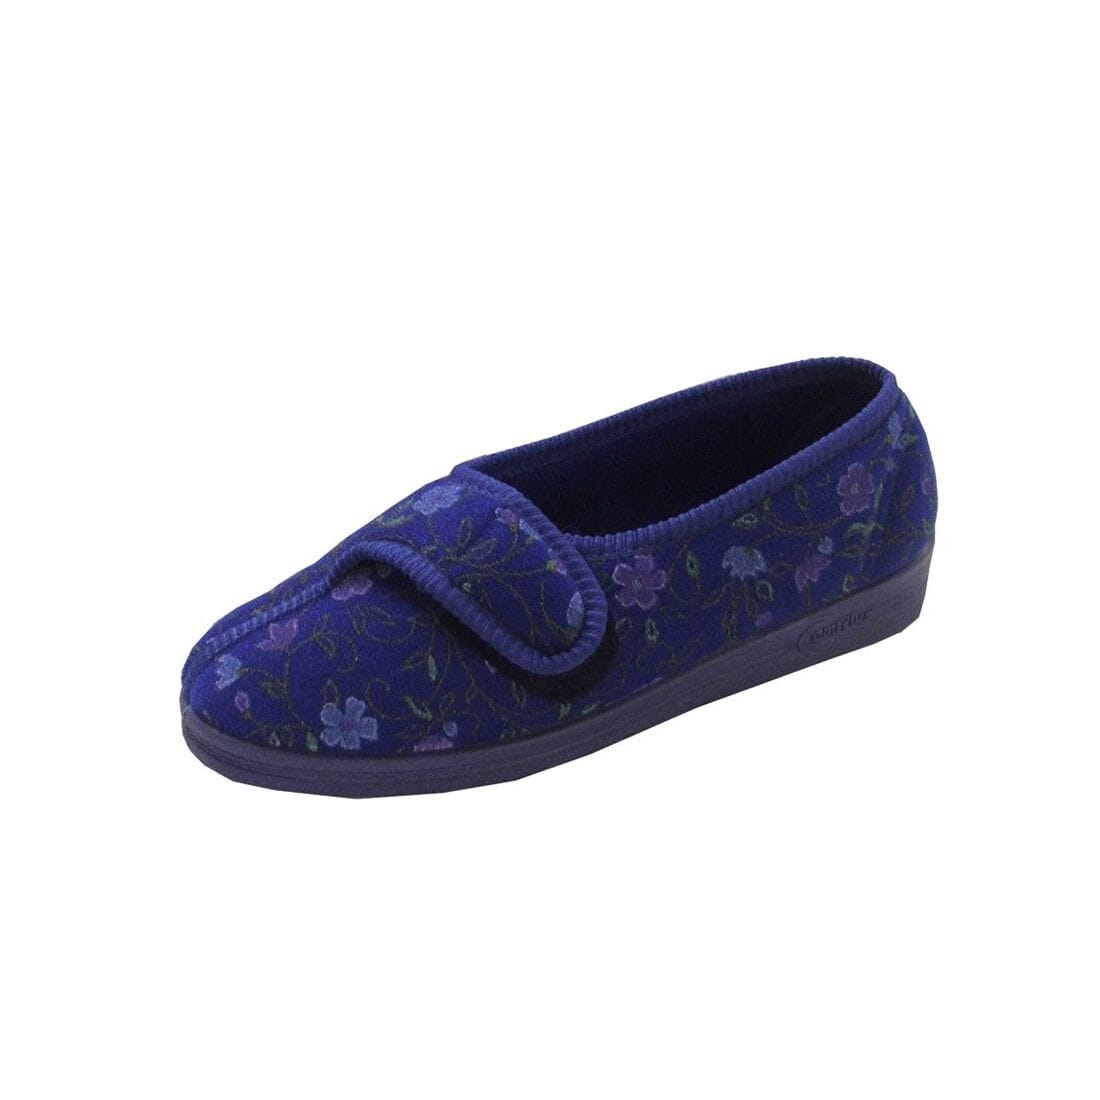 View Ladies Diana Slipper Blue Floral size 3 information